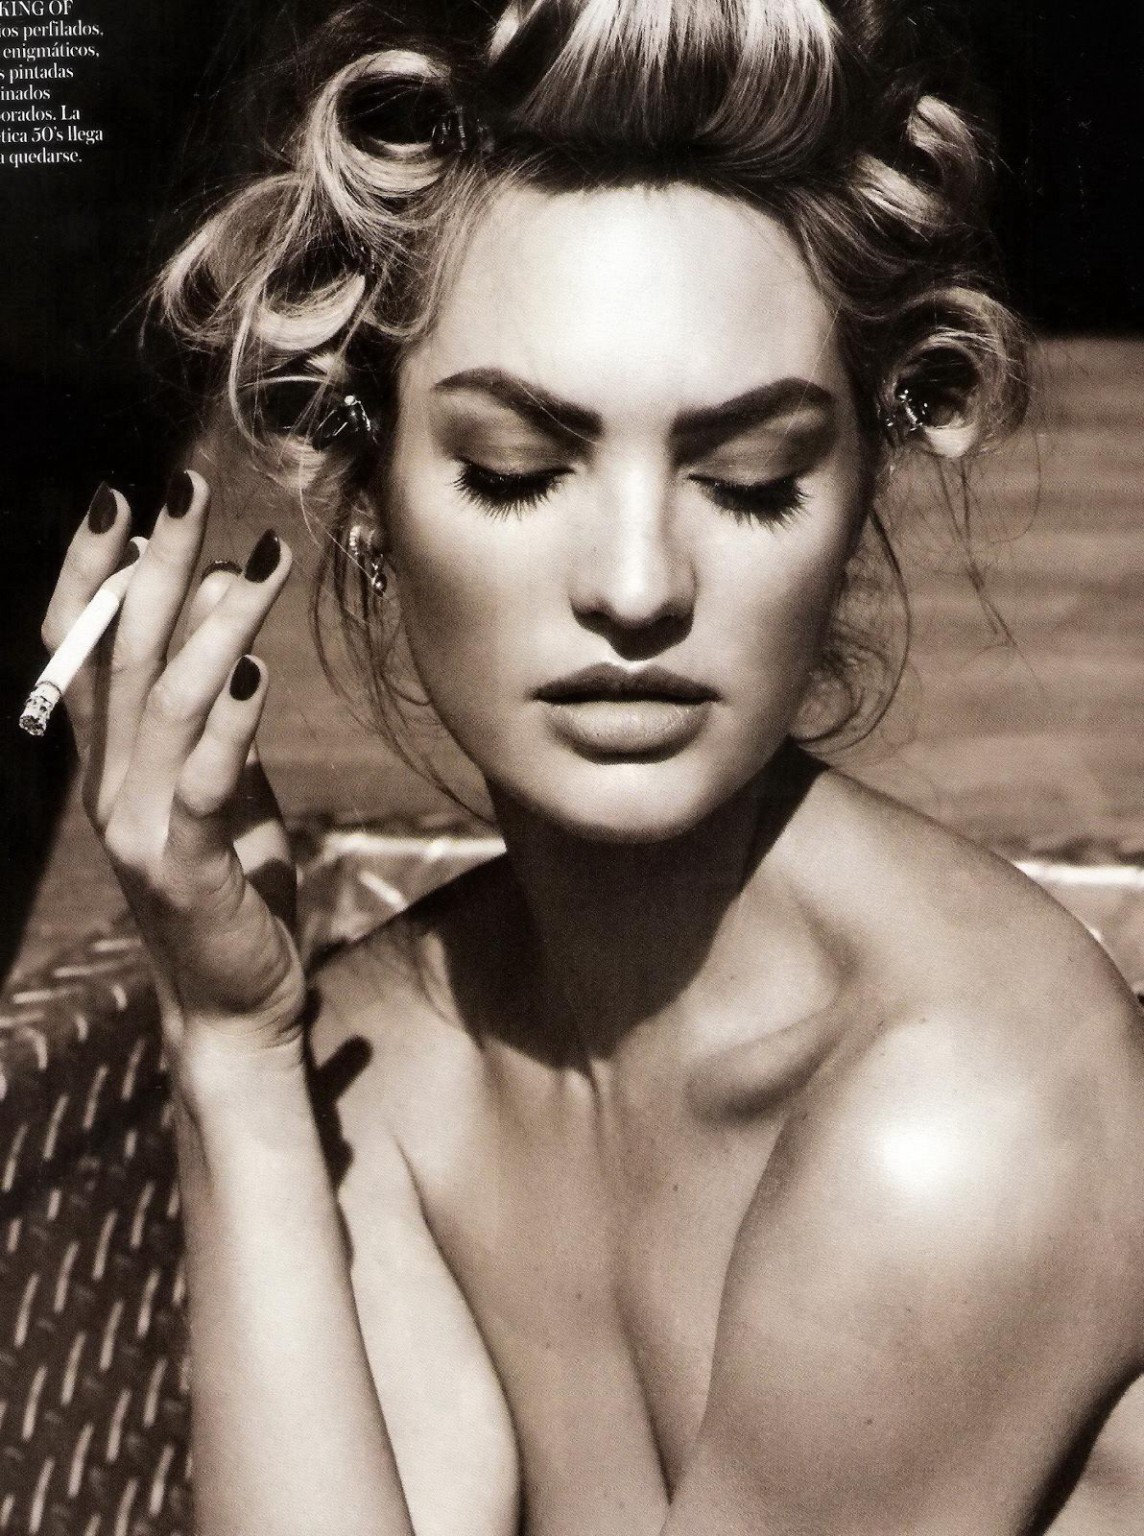 Candice Swanepoel topless but hiding her boobs in April 2013 issue of Spanish Vo #75237969